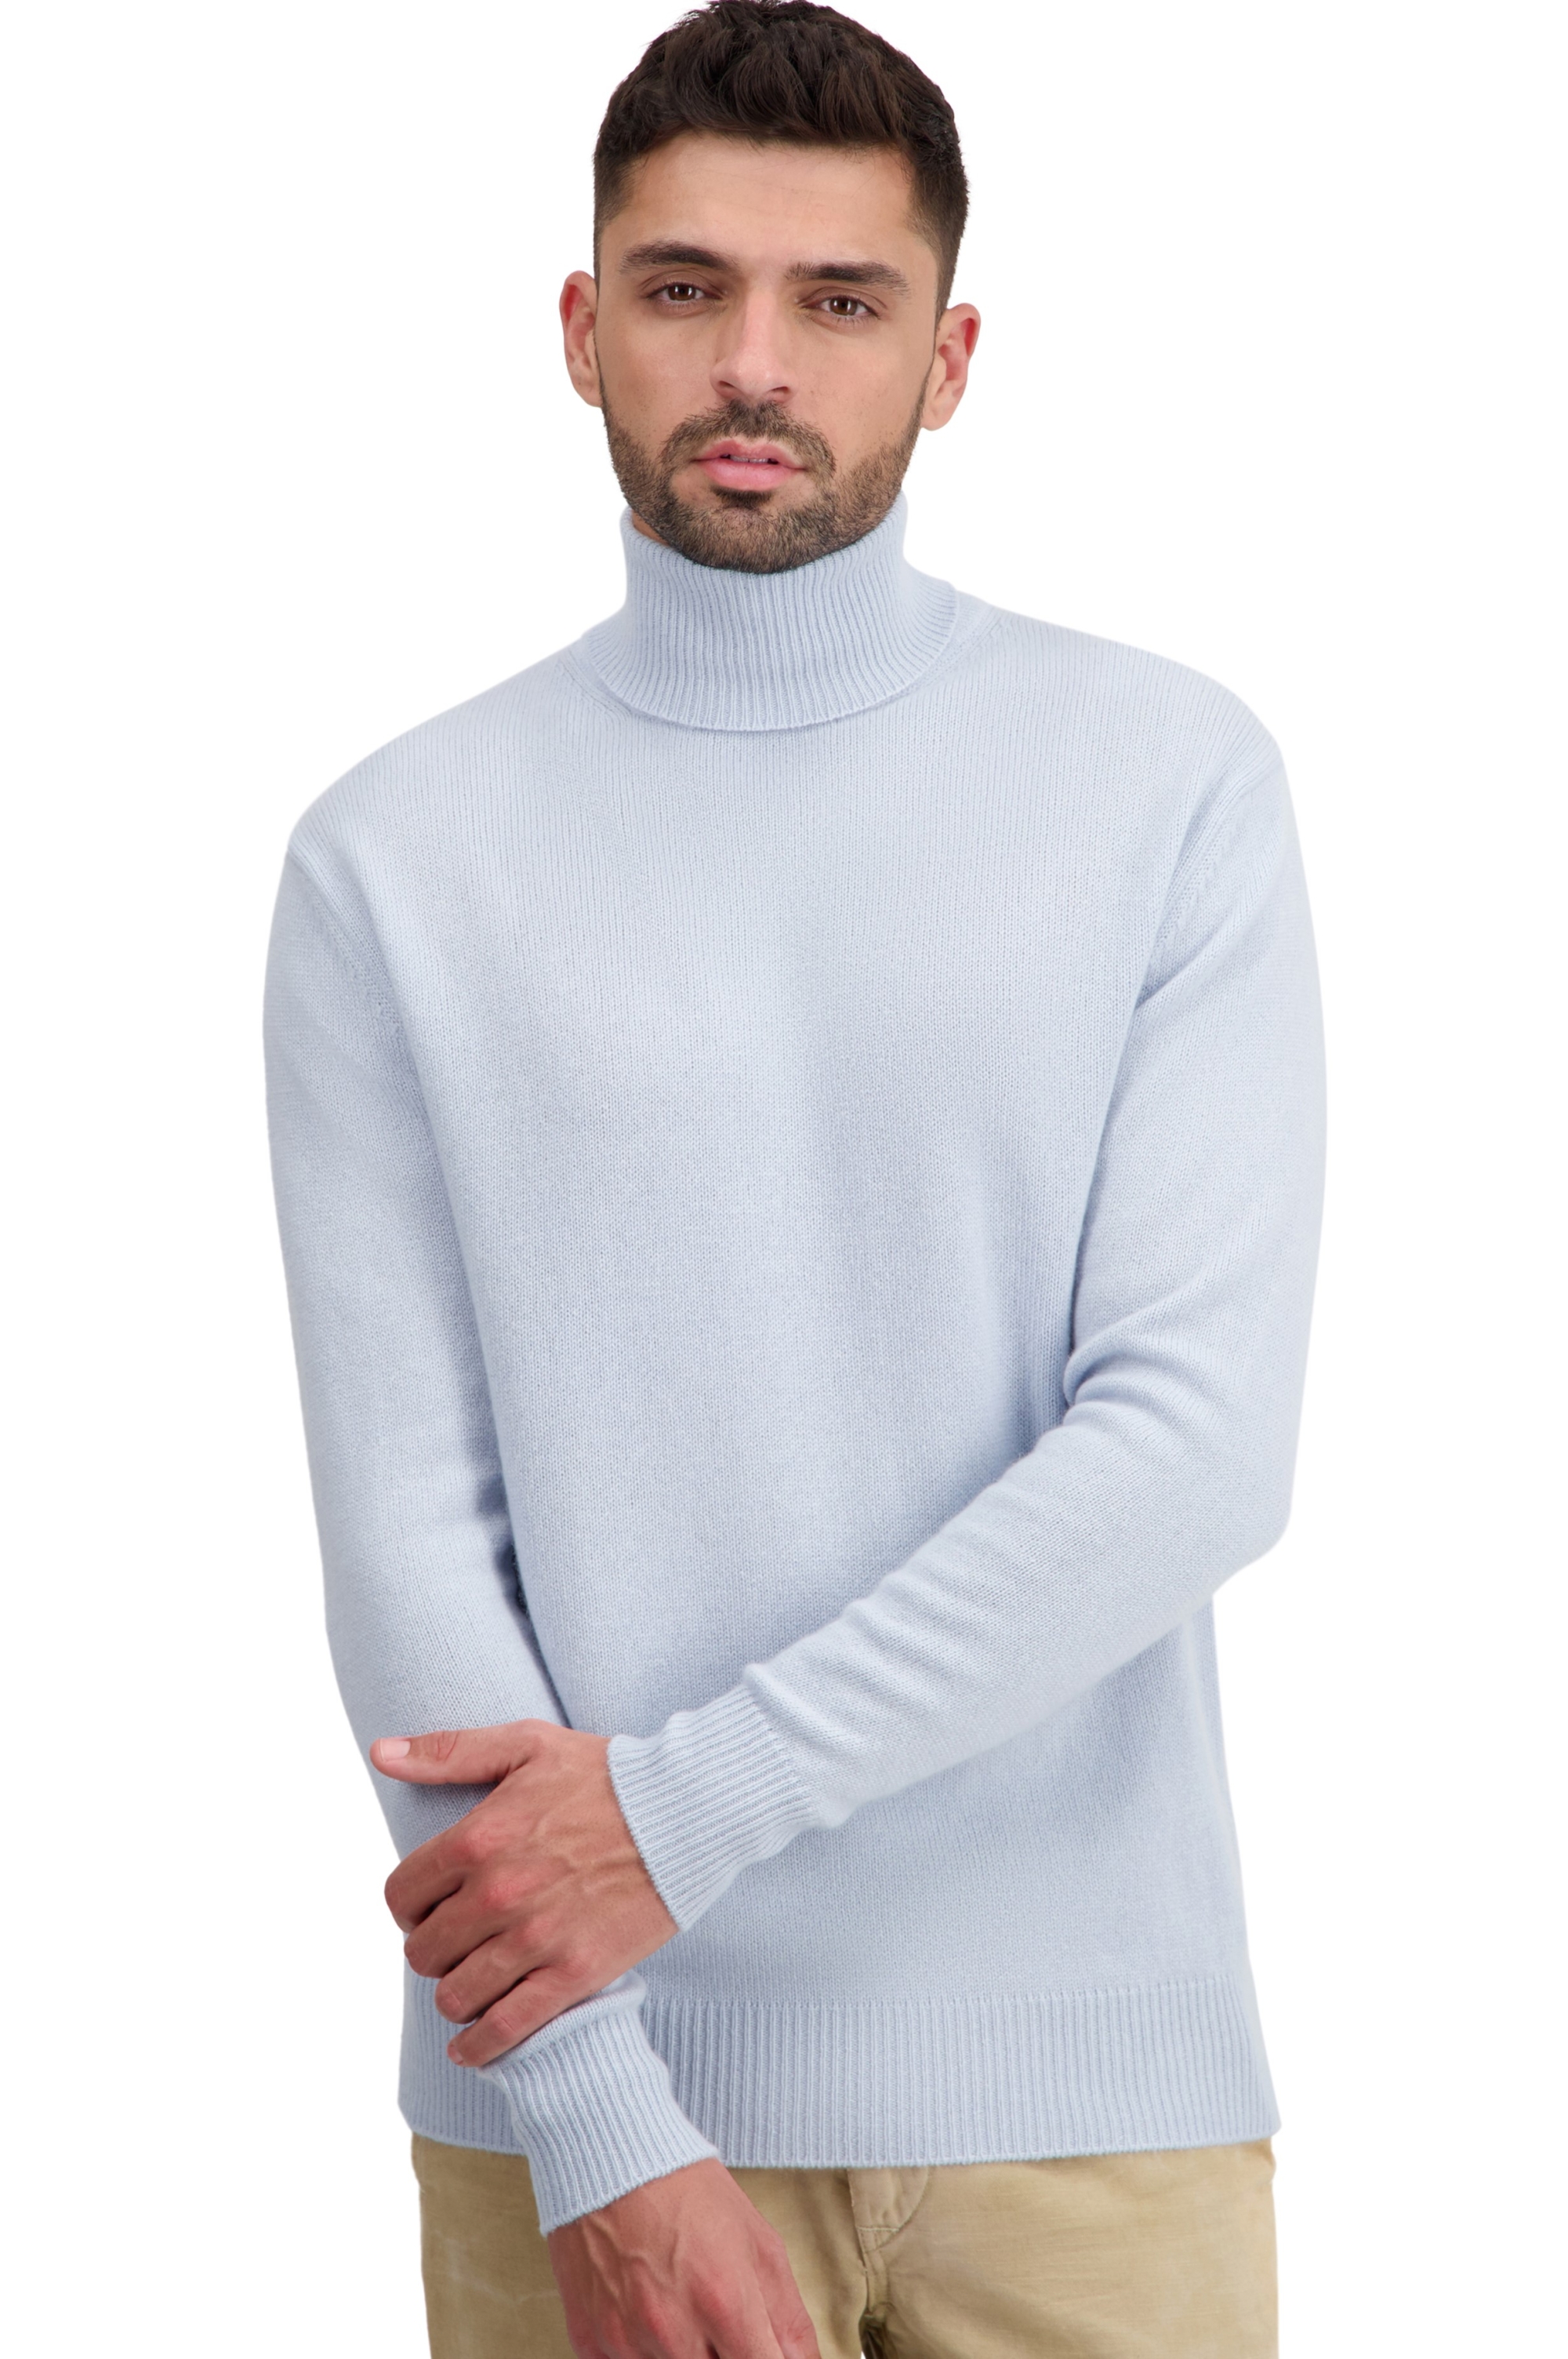 Cashmere men basic sweaters at low prices torino first whisper xl